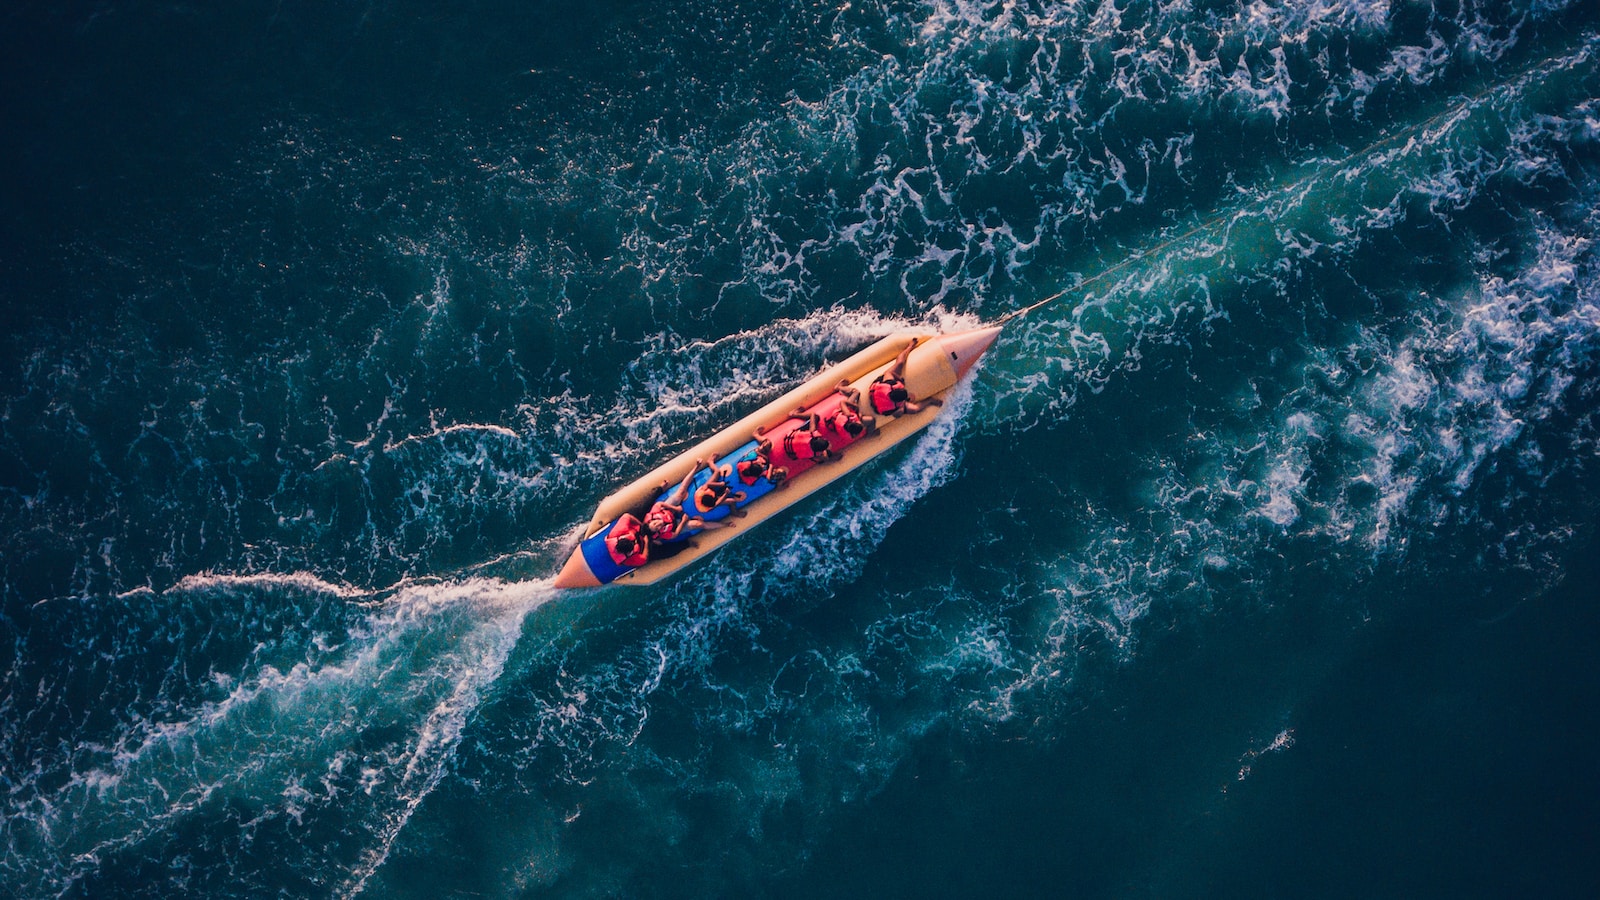 bird's eye view photography of boat on body of water